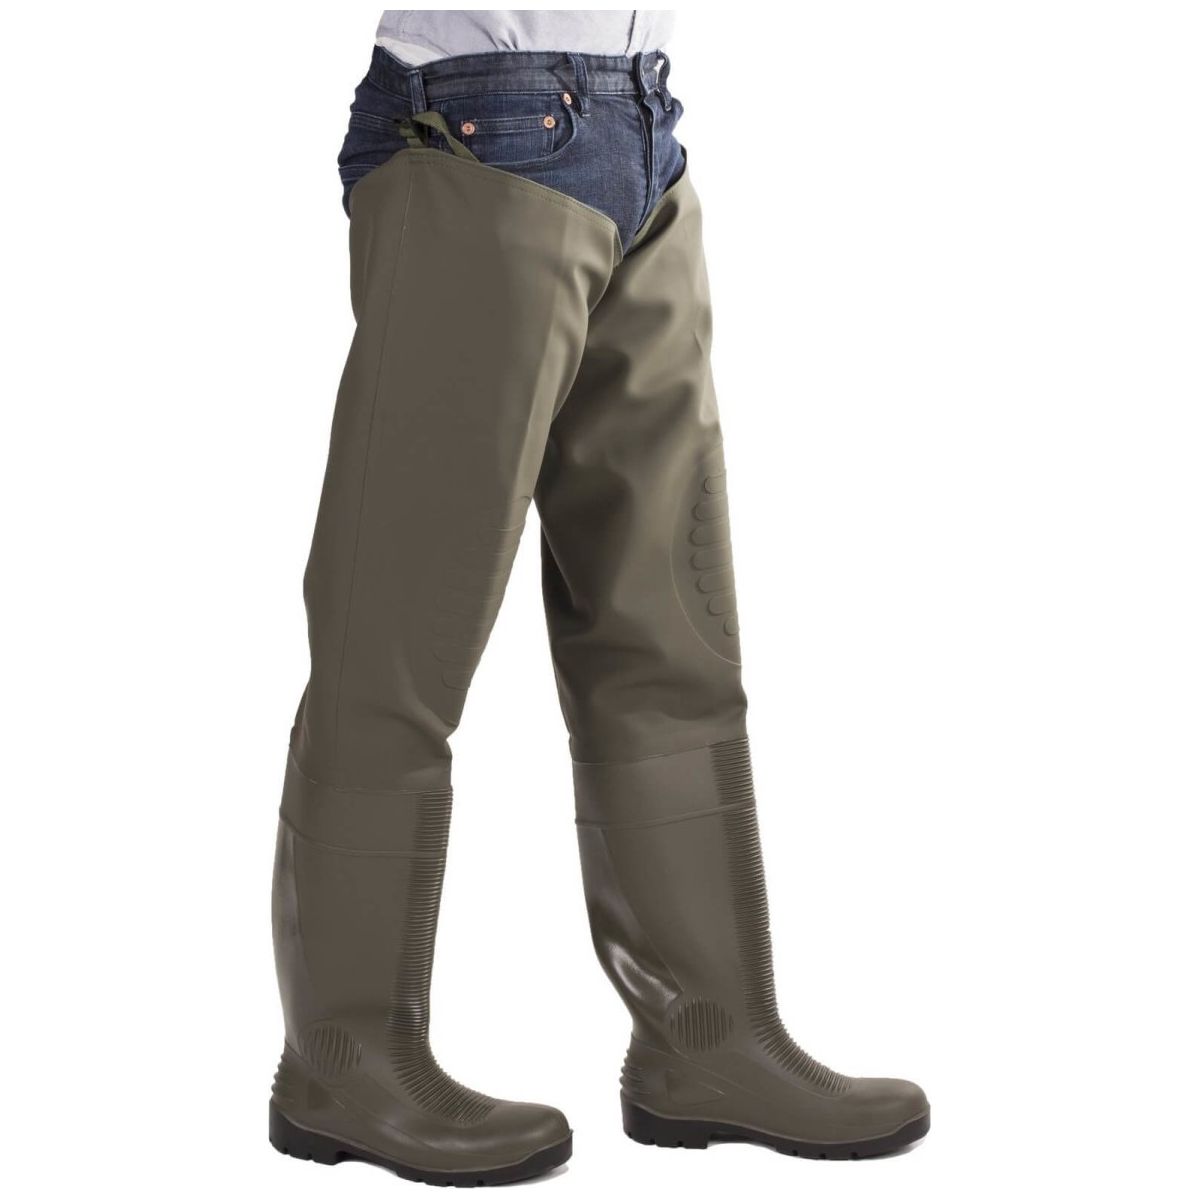 Amblers Forth Thigh Safety Waders Womens - workweargurus.com